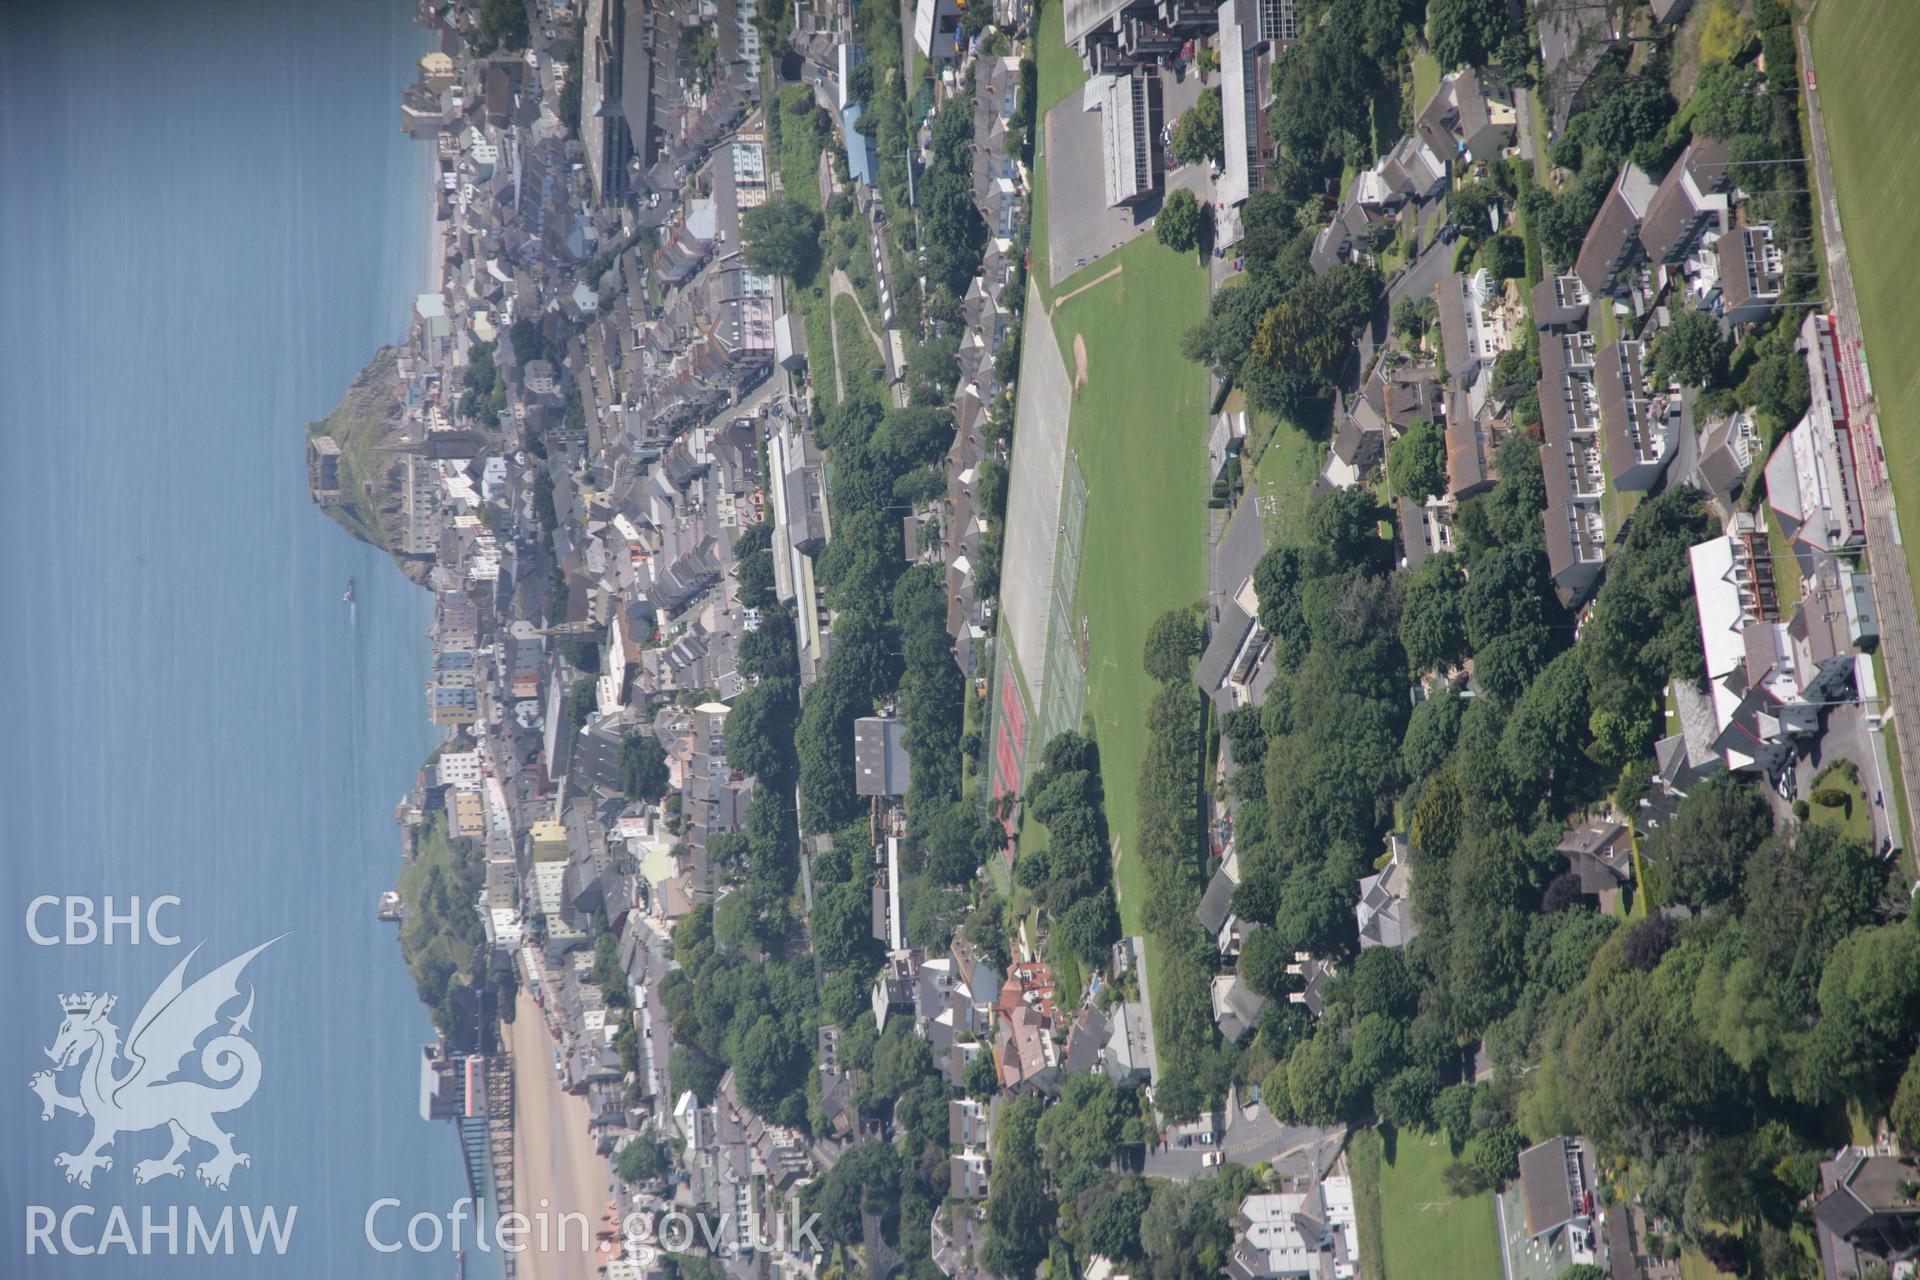 RCAHMW colour oblique aerial photograph of Tenby. A long view from the north-west. Taken on 22 June 2005 by Toby Driver